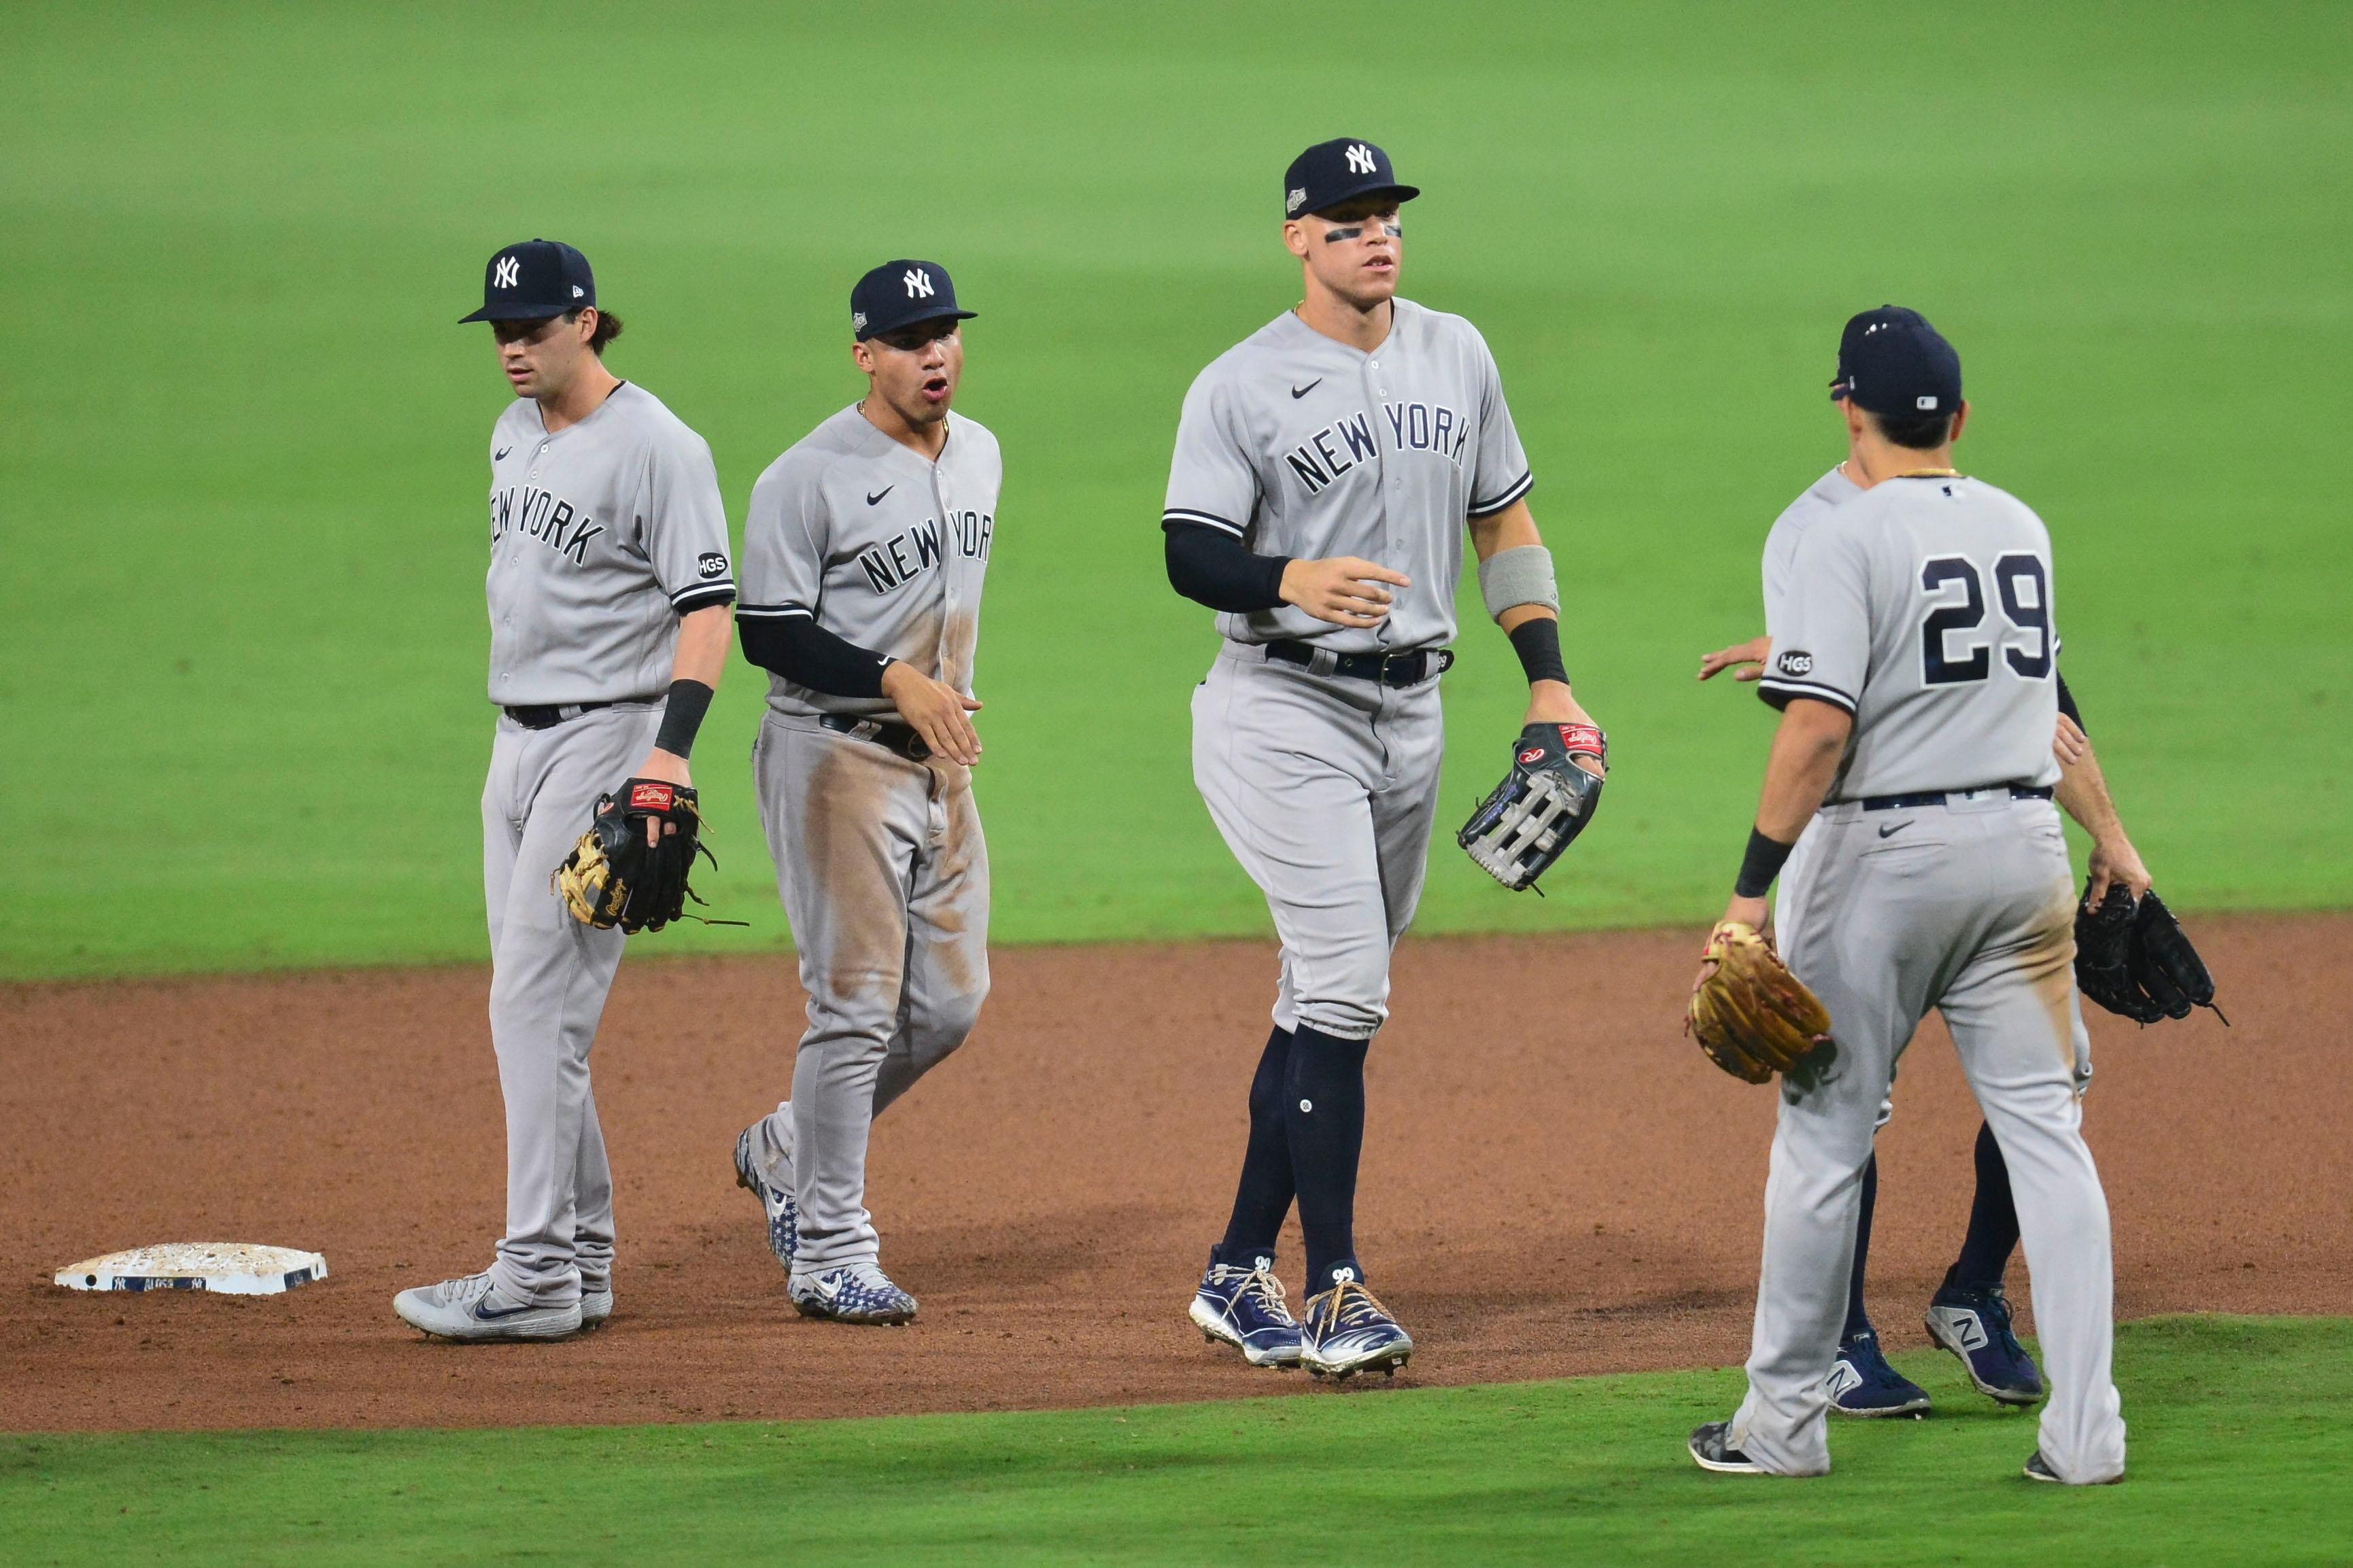 Oct 5, 2020; San Diego, California, USA; New York Yankees right fielder Aaron Judge (99) celebrates with teammates after game one of the 2020 ALDS against the Tampa Bay Rays at Petco Park. Mandatory Credit: Gary A. Vasquez-USA TODAY Sports / © Gary A. Vasquez-USA TODAY Sports